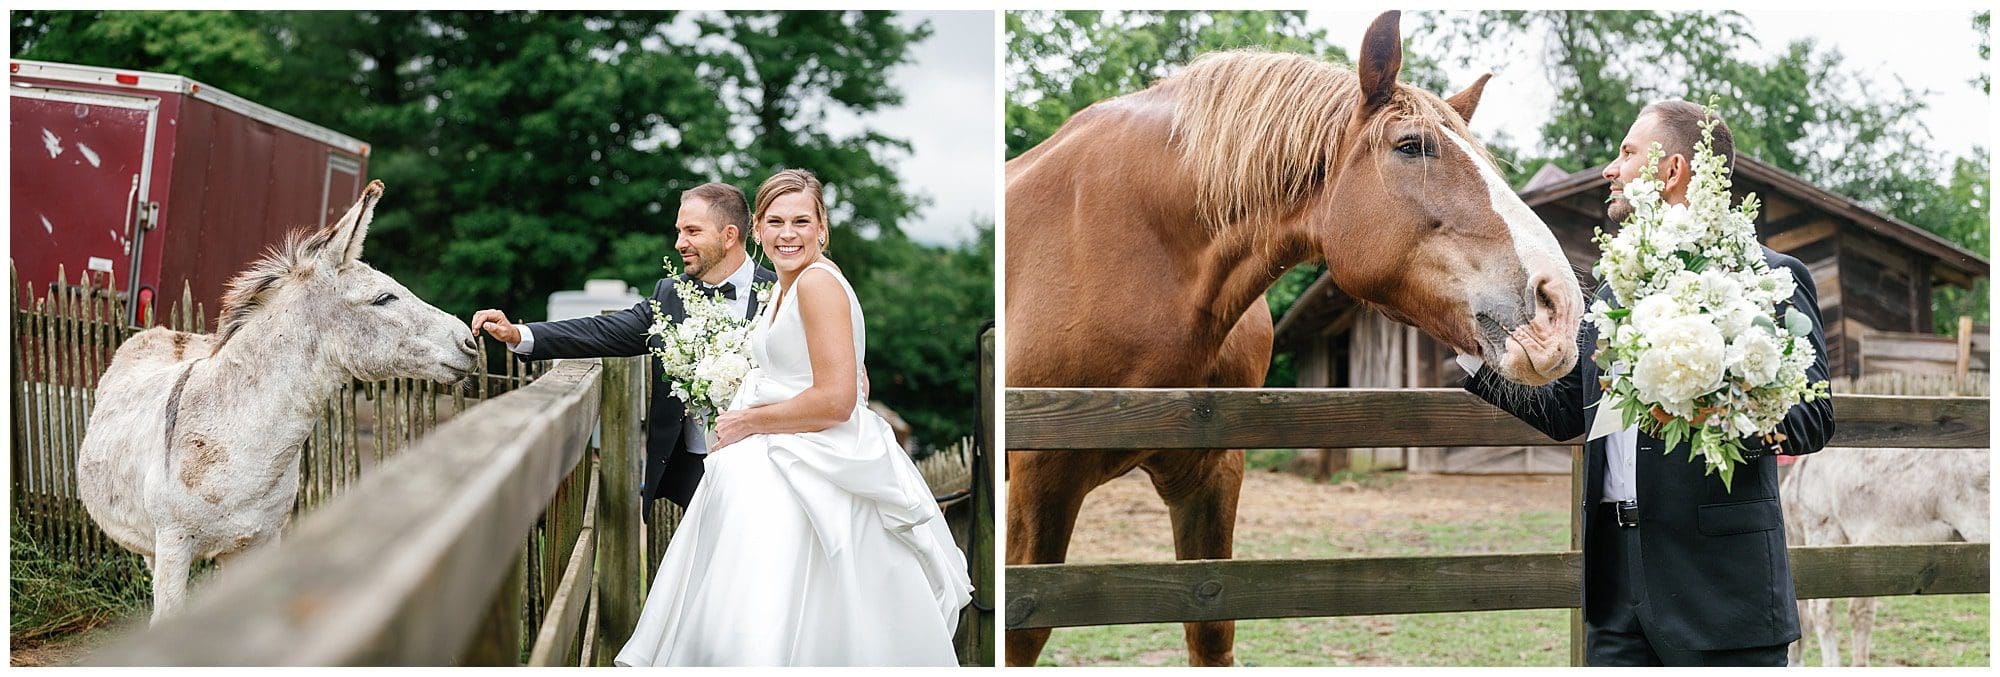 Fun destination wedding at the farm in candler, nc. bride and groom visit with the animals on the property